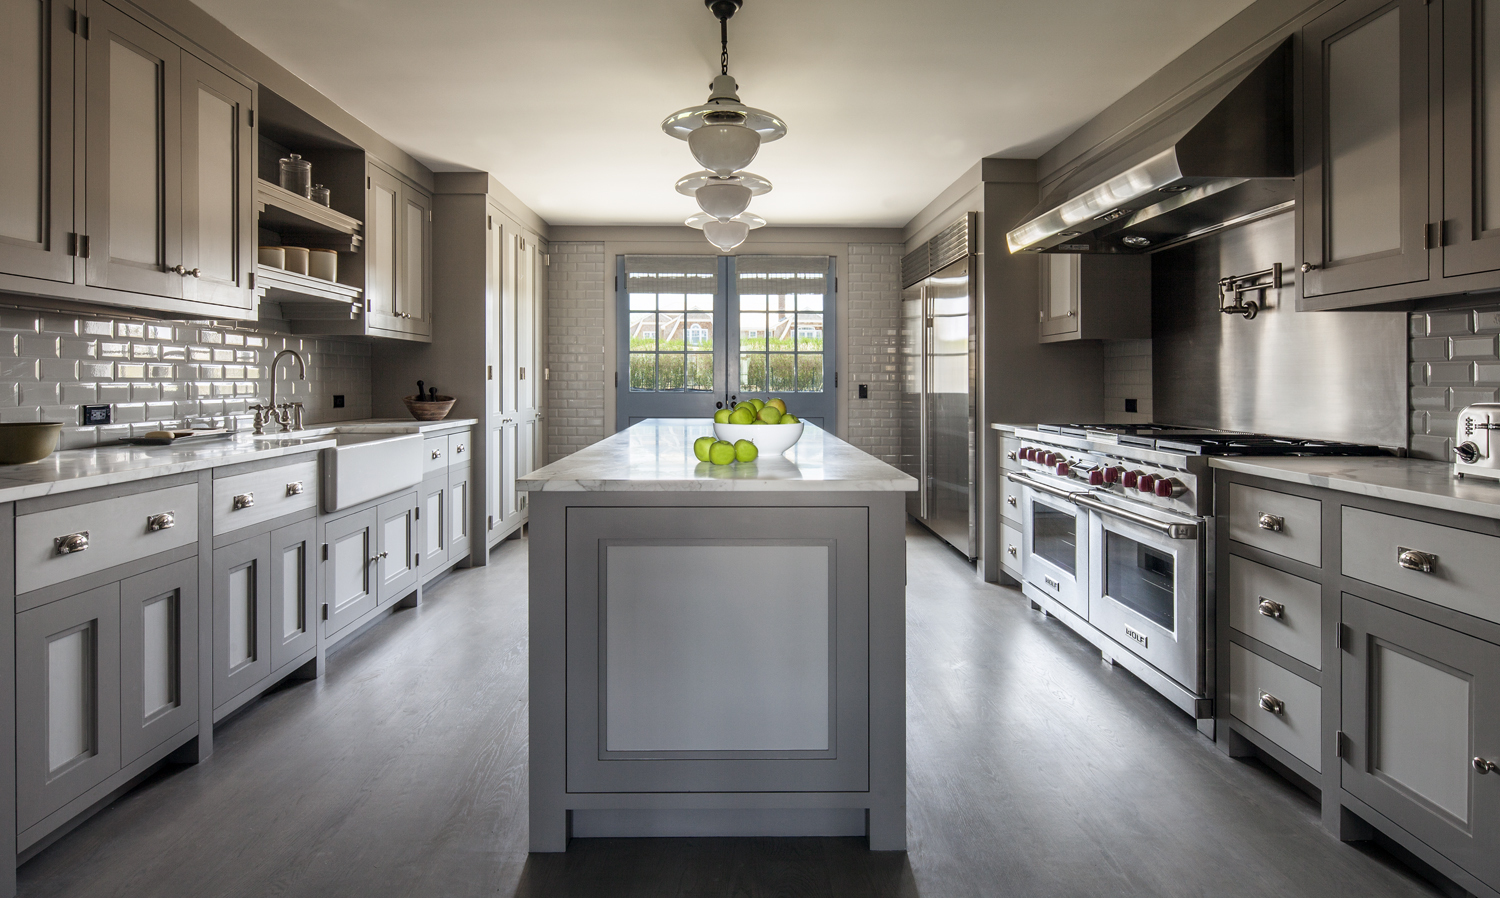 Gas stoves, like the high-end version featured in this kitchen, could become a thing of the past if new regulations ban the use of fossil fuel appliances in new construction in a few years. COURTESY MICHAEL DAVIS DESIGN AND CONSTRUCTION